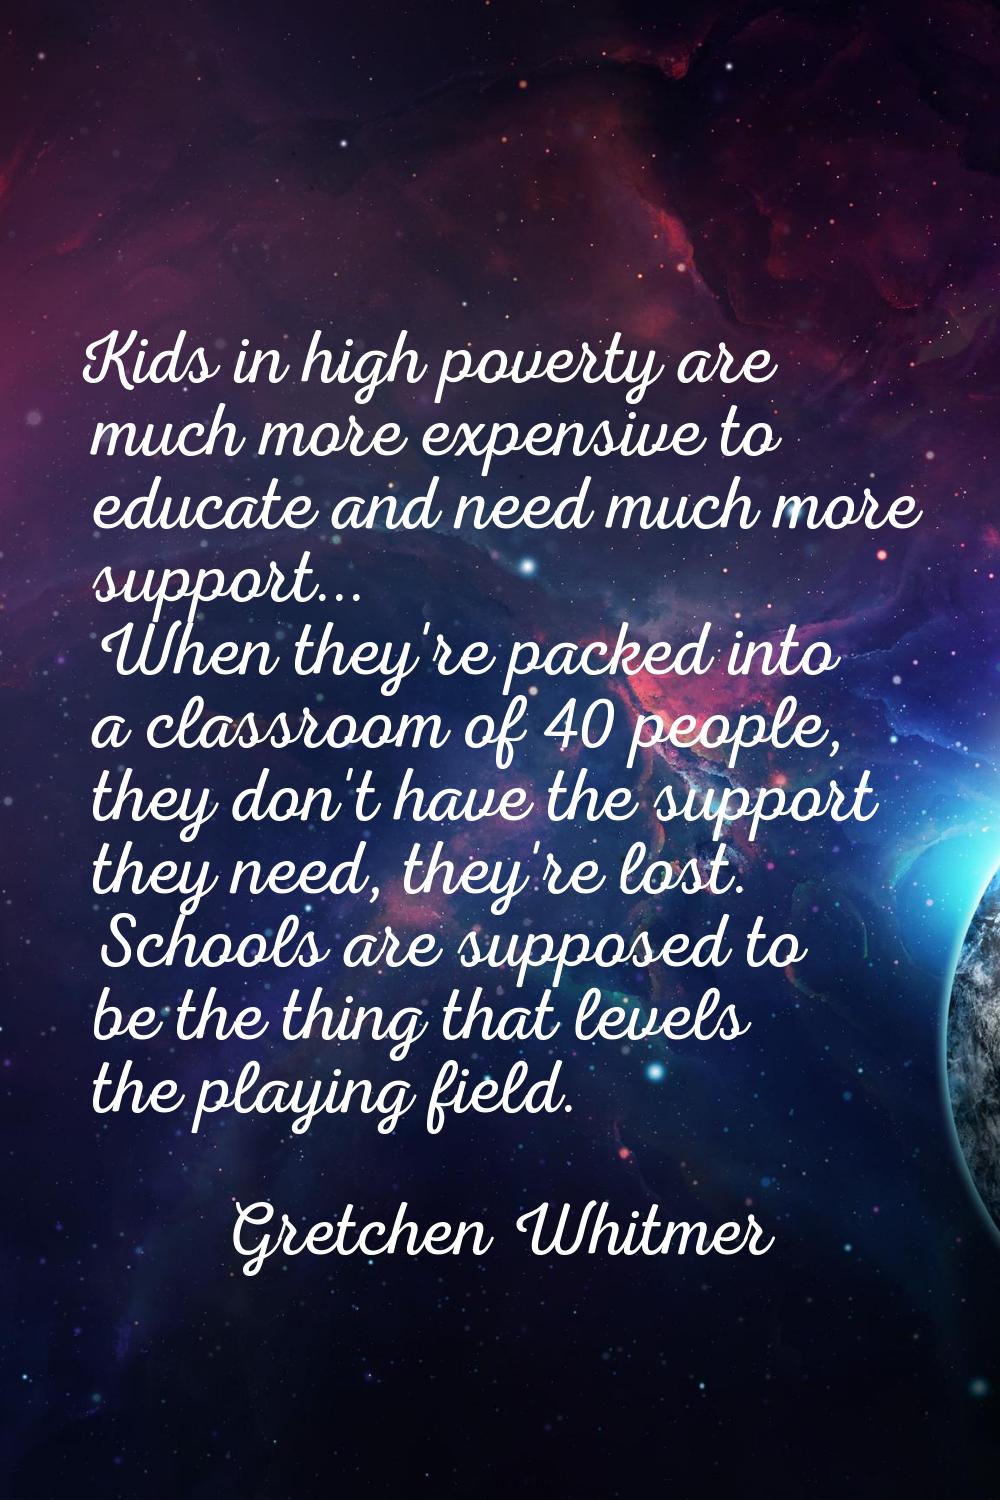 Kids in high poverty are much more expensive to educate and need much more support... When they're 